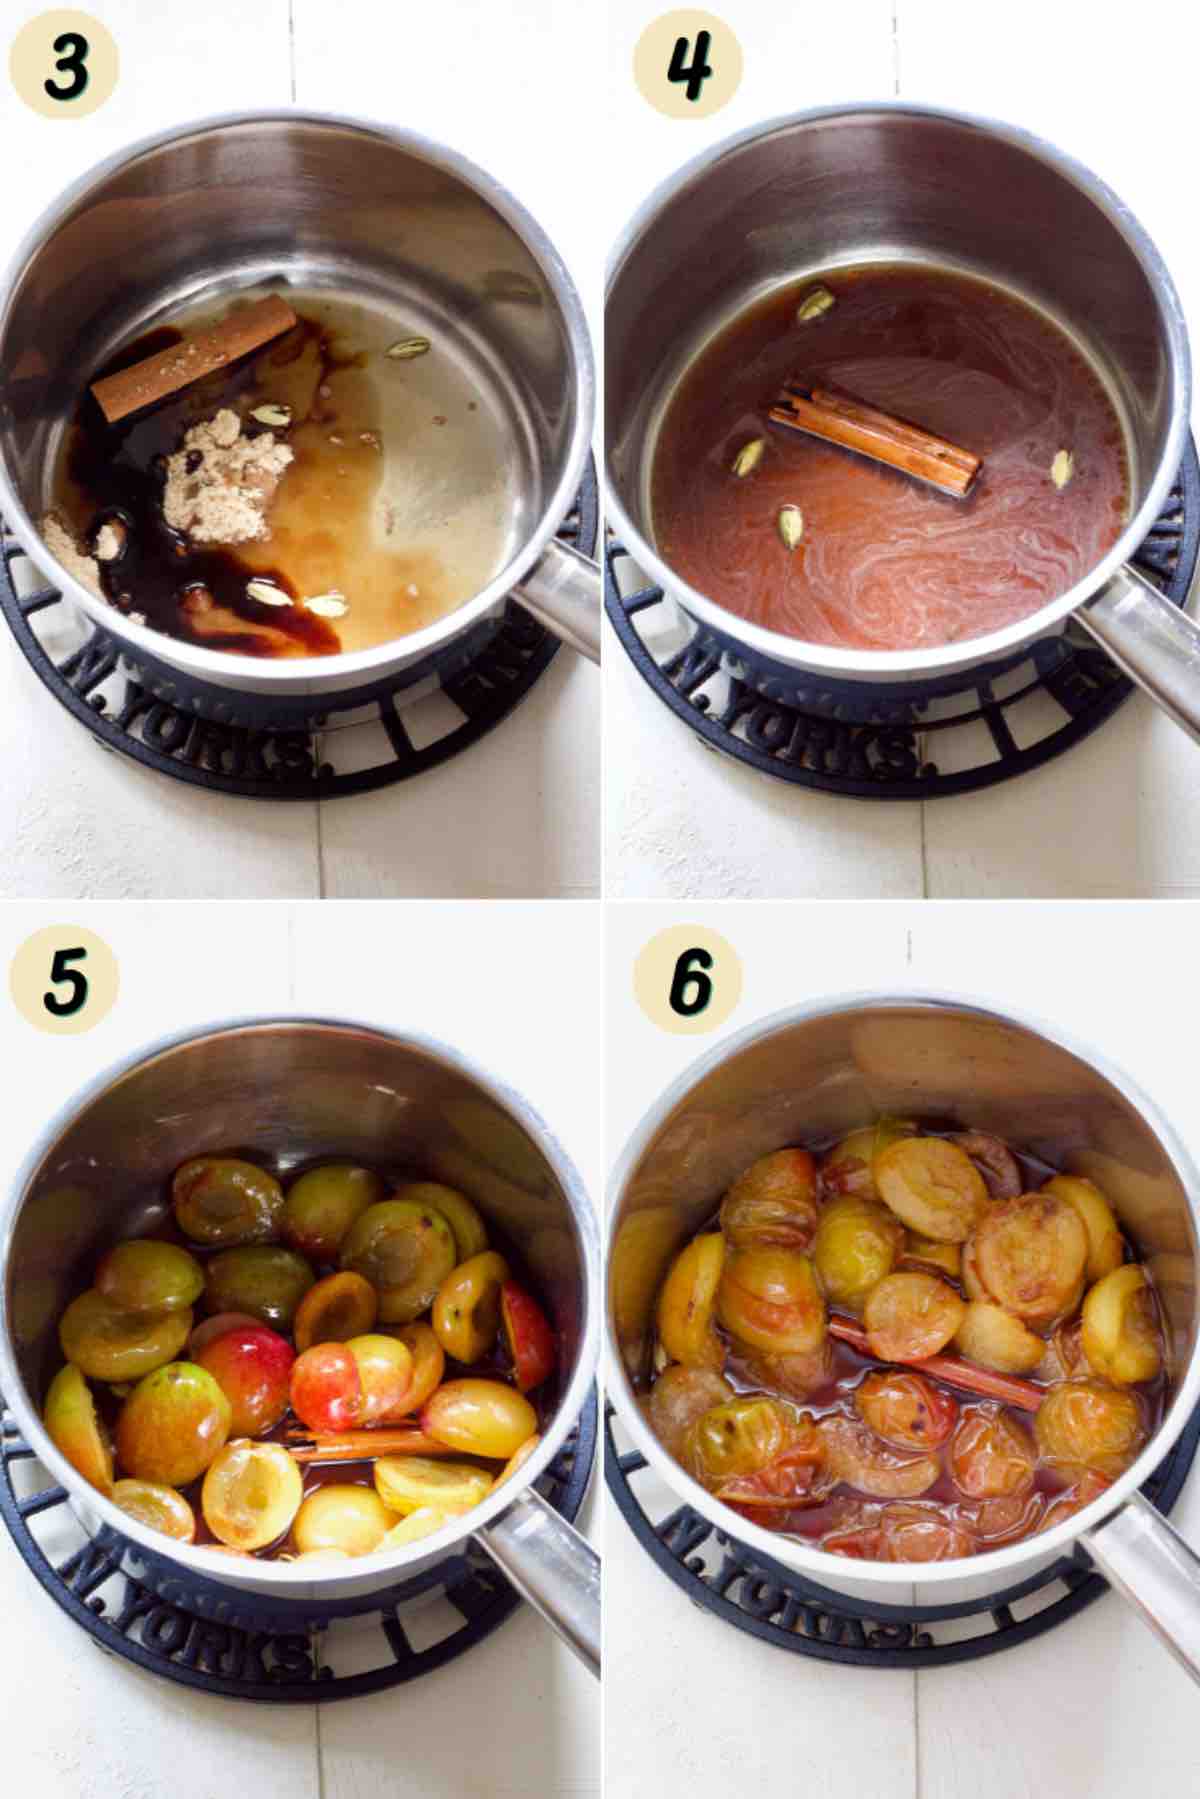 Process of stewing plums.